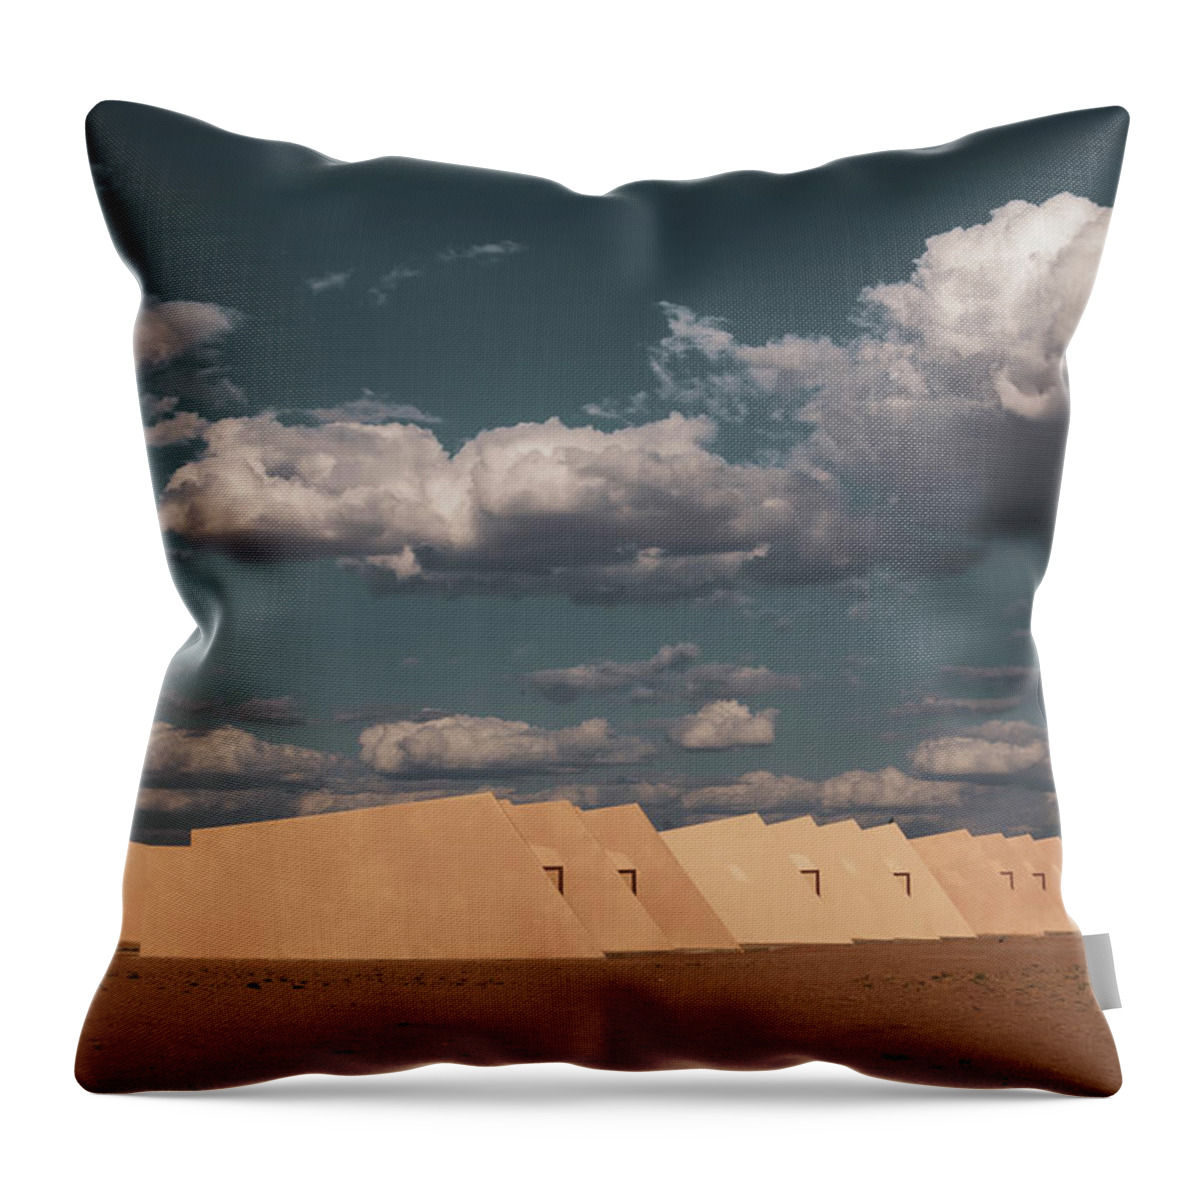 Minimalism Throw Pillow featuring the photograph Desert Architecture by Martin Vorel Minimalist Photography